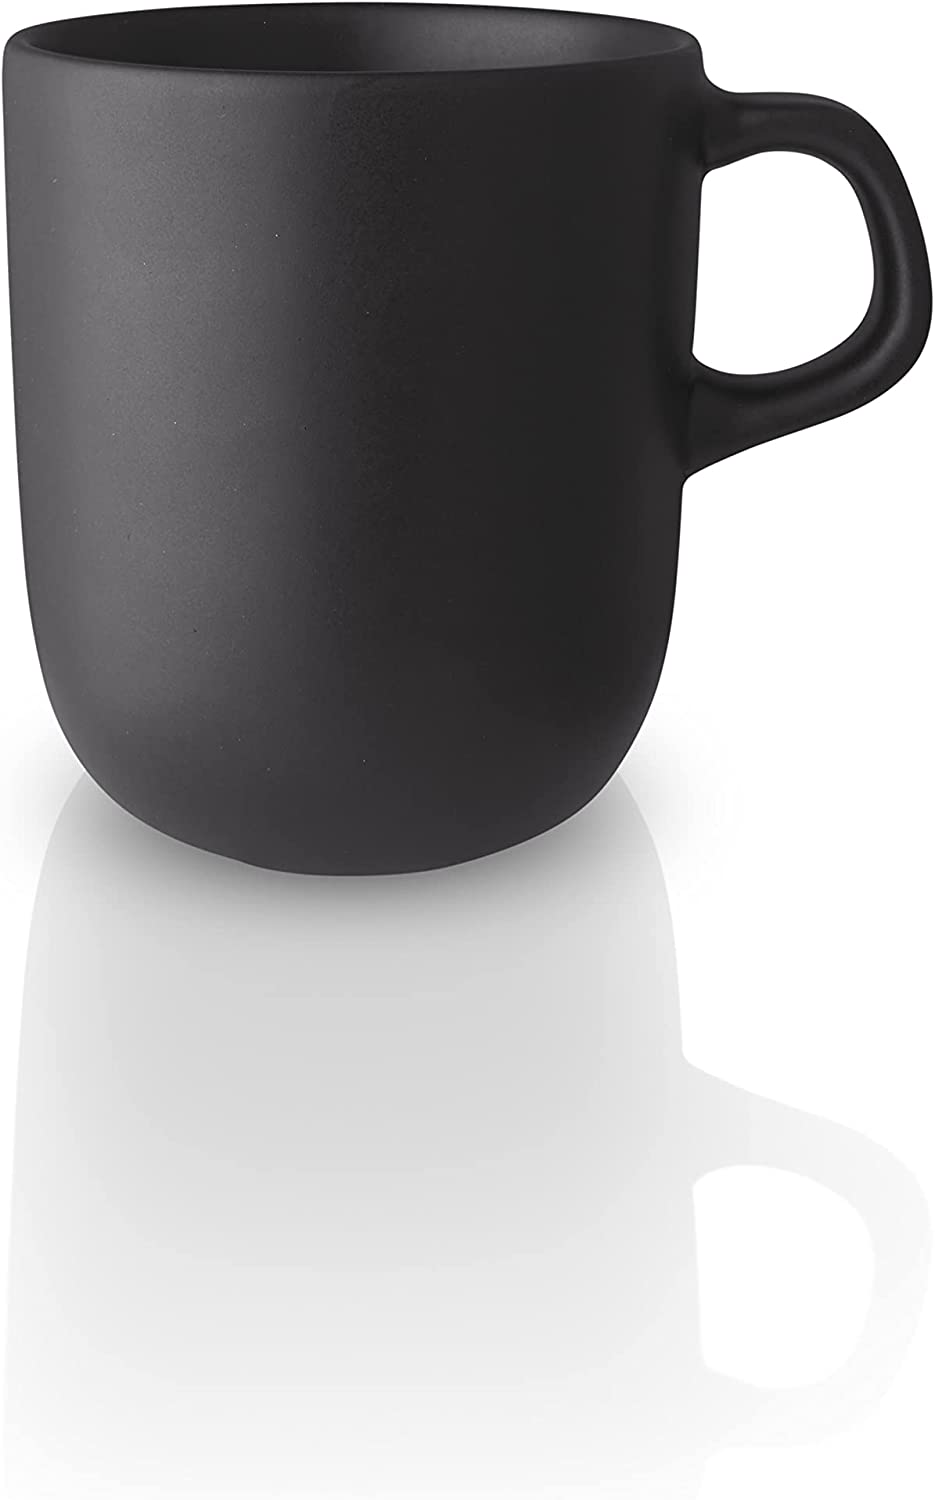 EVA SOLO Mug 40 cl Nordic kitchen, suitable for everyday use, black